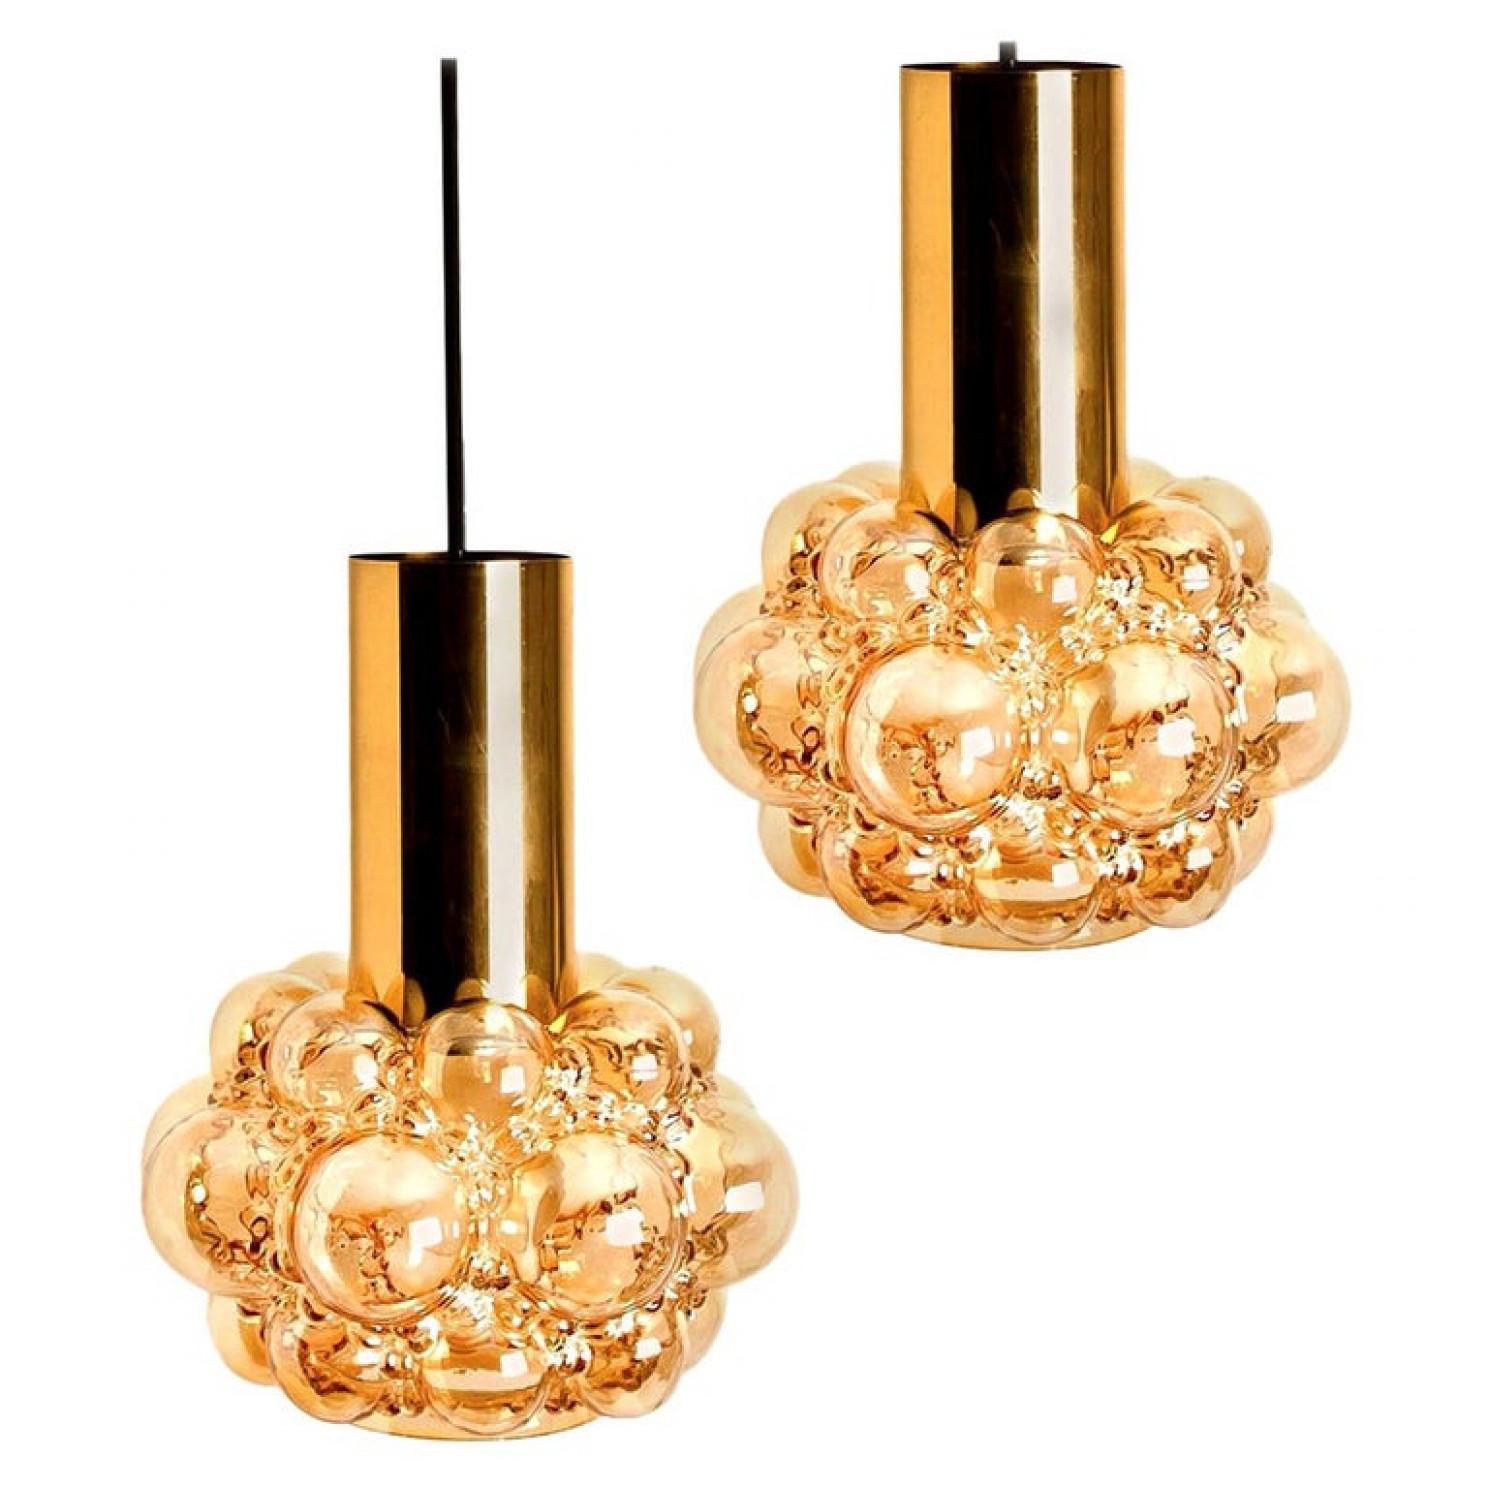 Pair beautiful bubble glass chandeliers or pendant lights designed by Helena Tynell for Glashütte Limburg. A design Classic, the amber colored/toned hand blown glass gives a wonderful warm glow.

Measures: Diameter 9.8 in (25 cm), height body